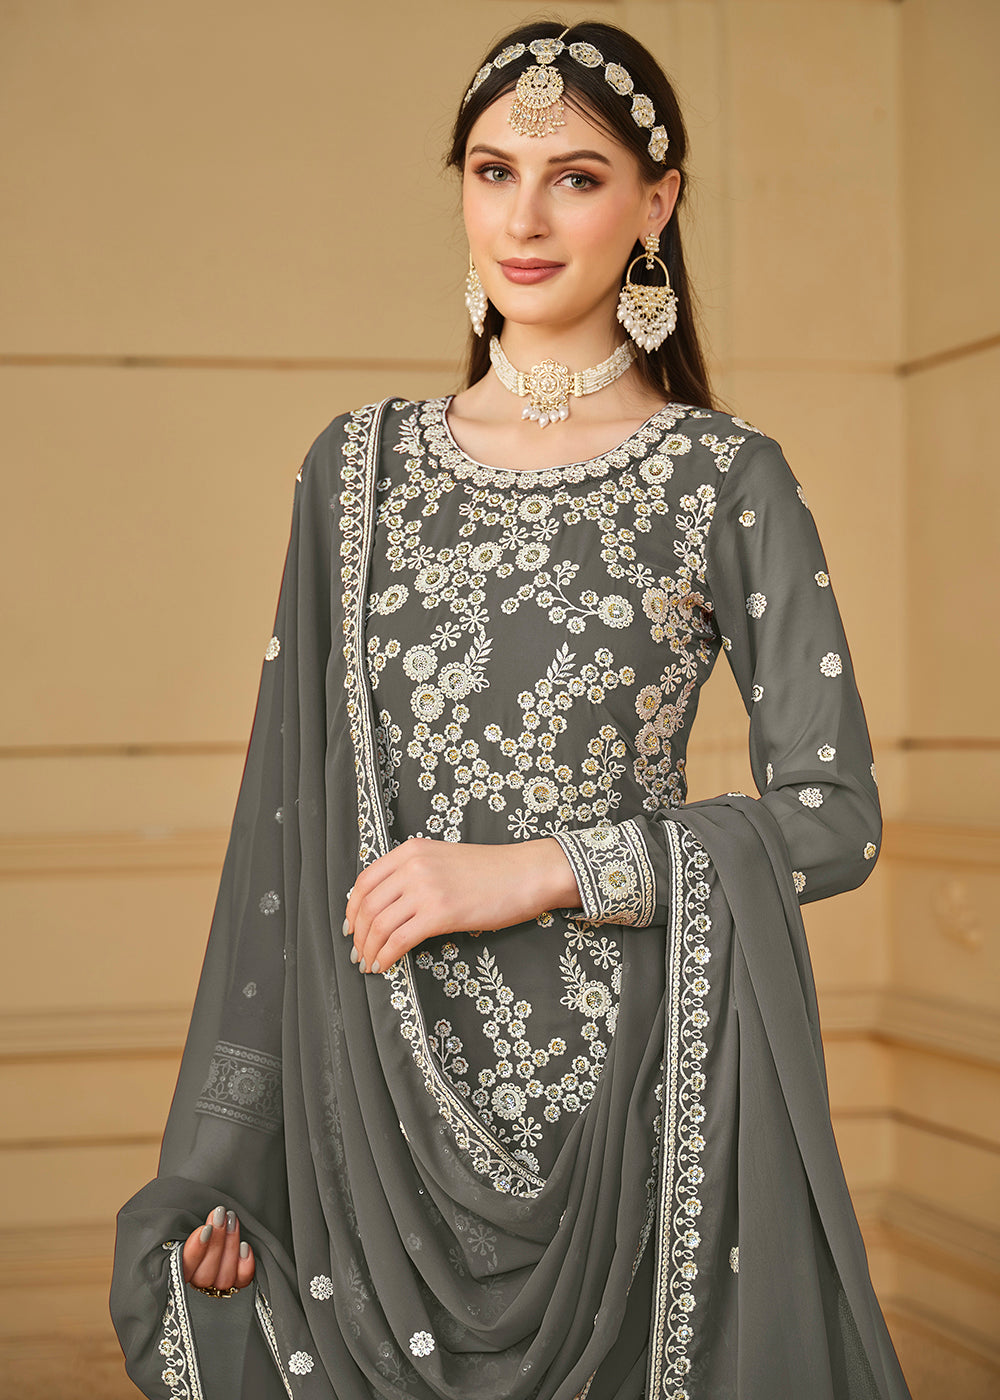 Shop Now Stone Grey Embroidered Georgette Gharara Style Suit Online at Empress Clothing in USA, UK, Canada, Italy & Worldwide. 